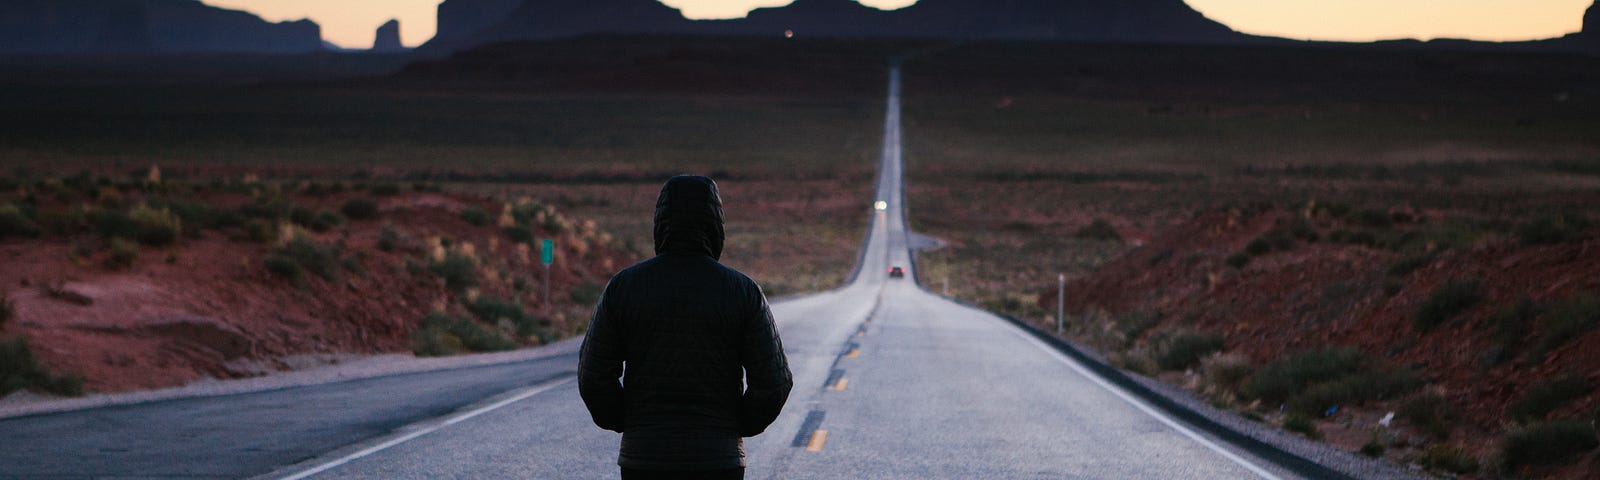 A person walking down a road that requires motivation to keep going.